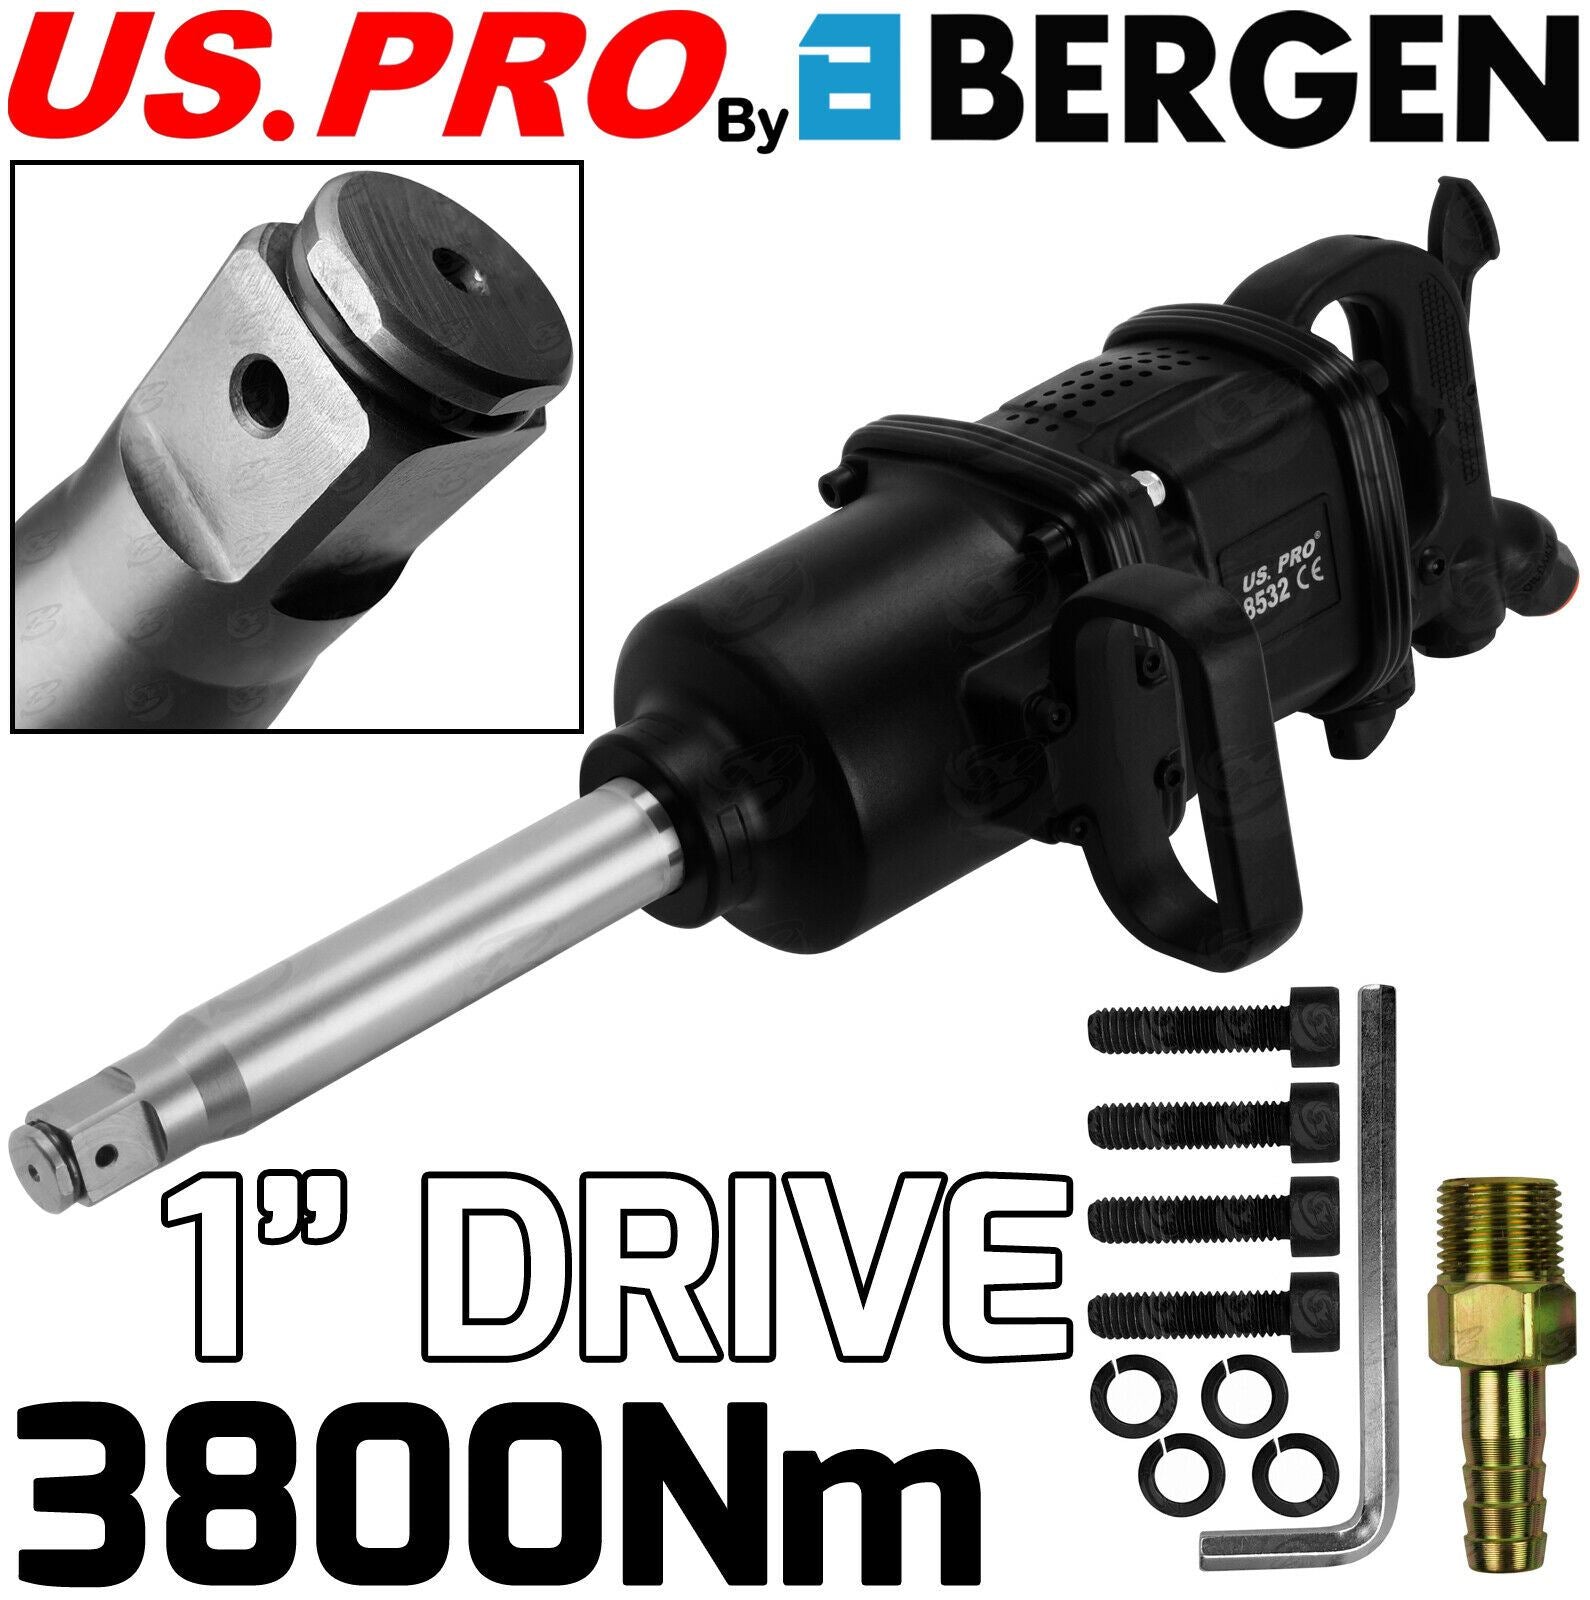 US PRO 1" DRIVE INDUSTRIAL AIR IMPACT WRENCH 3800Nm